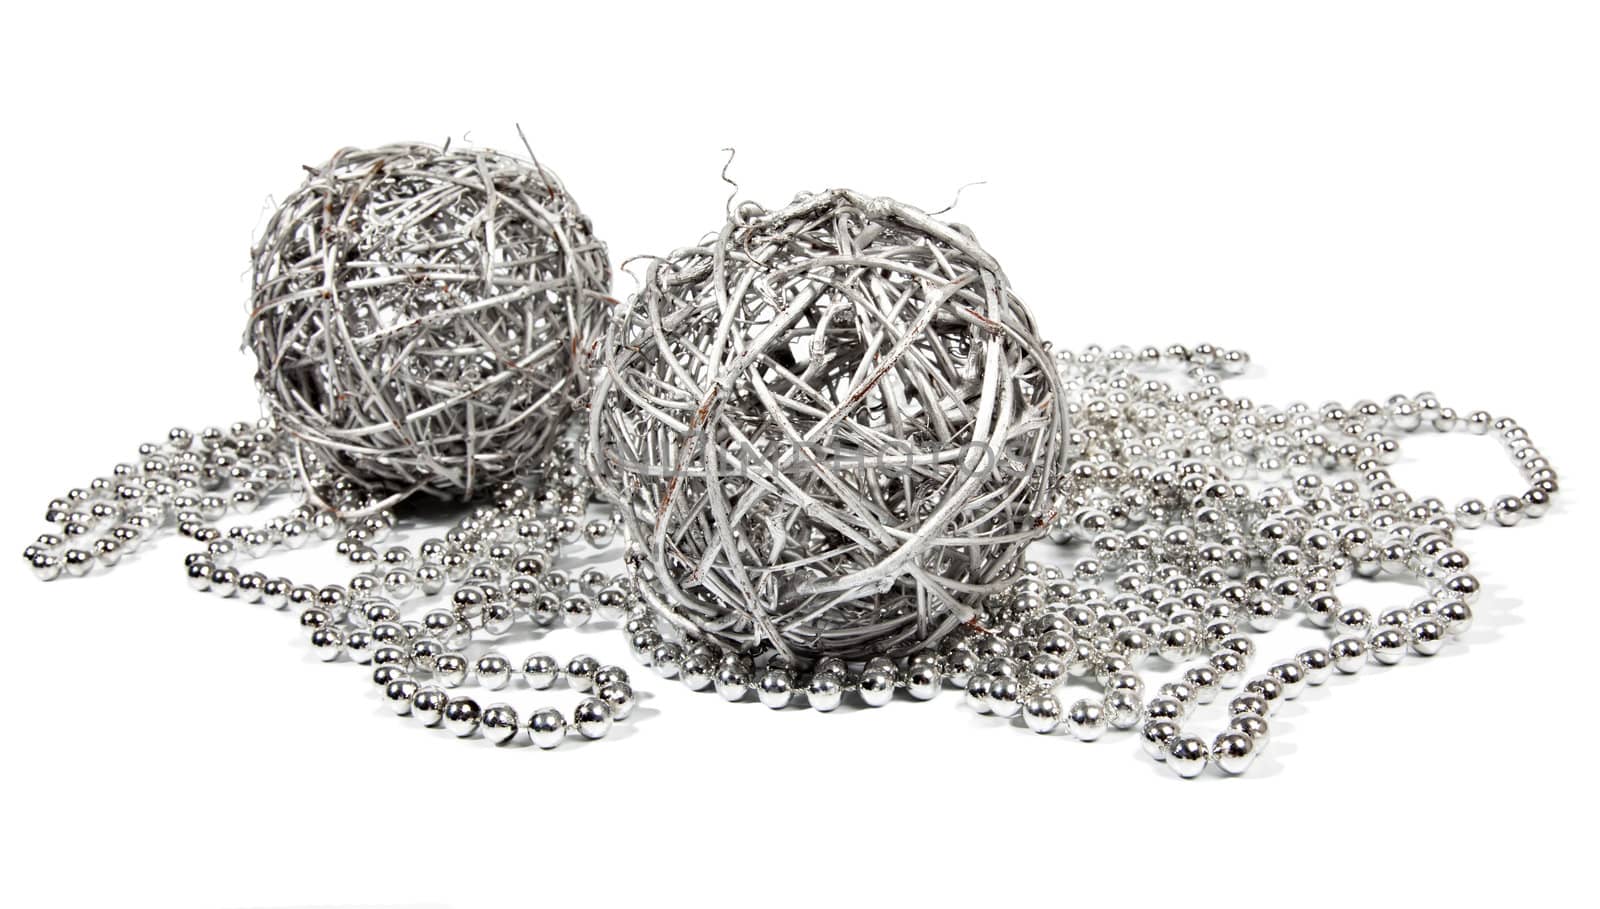 Two wicker balls and silver beads on white background